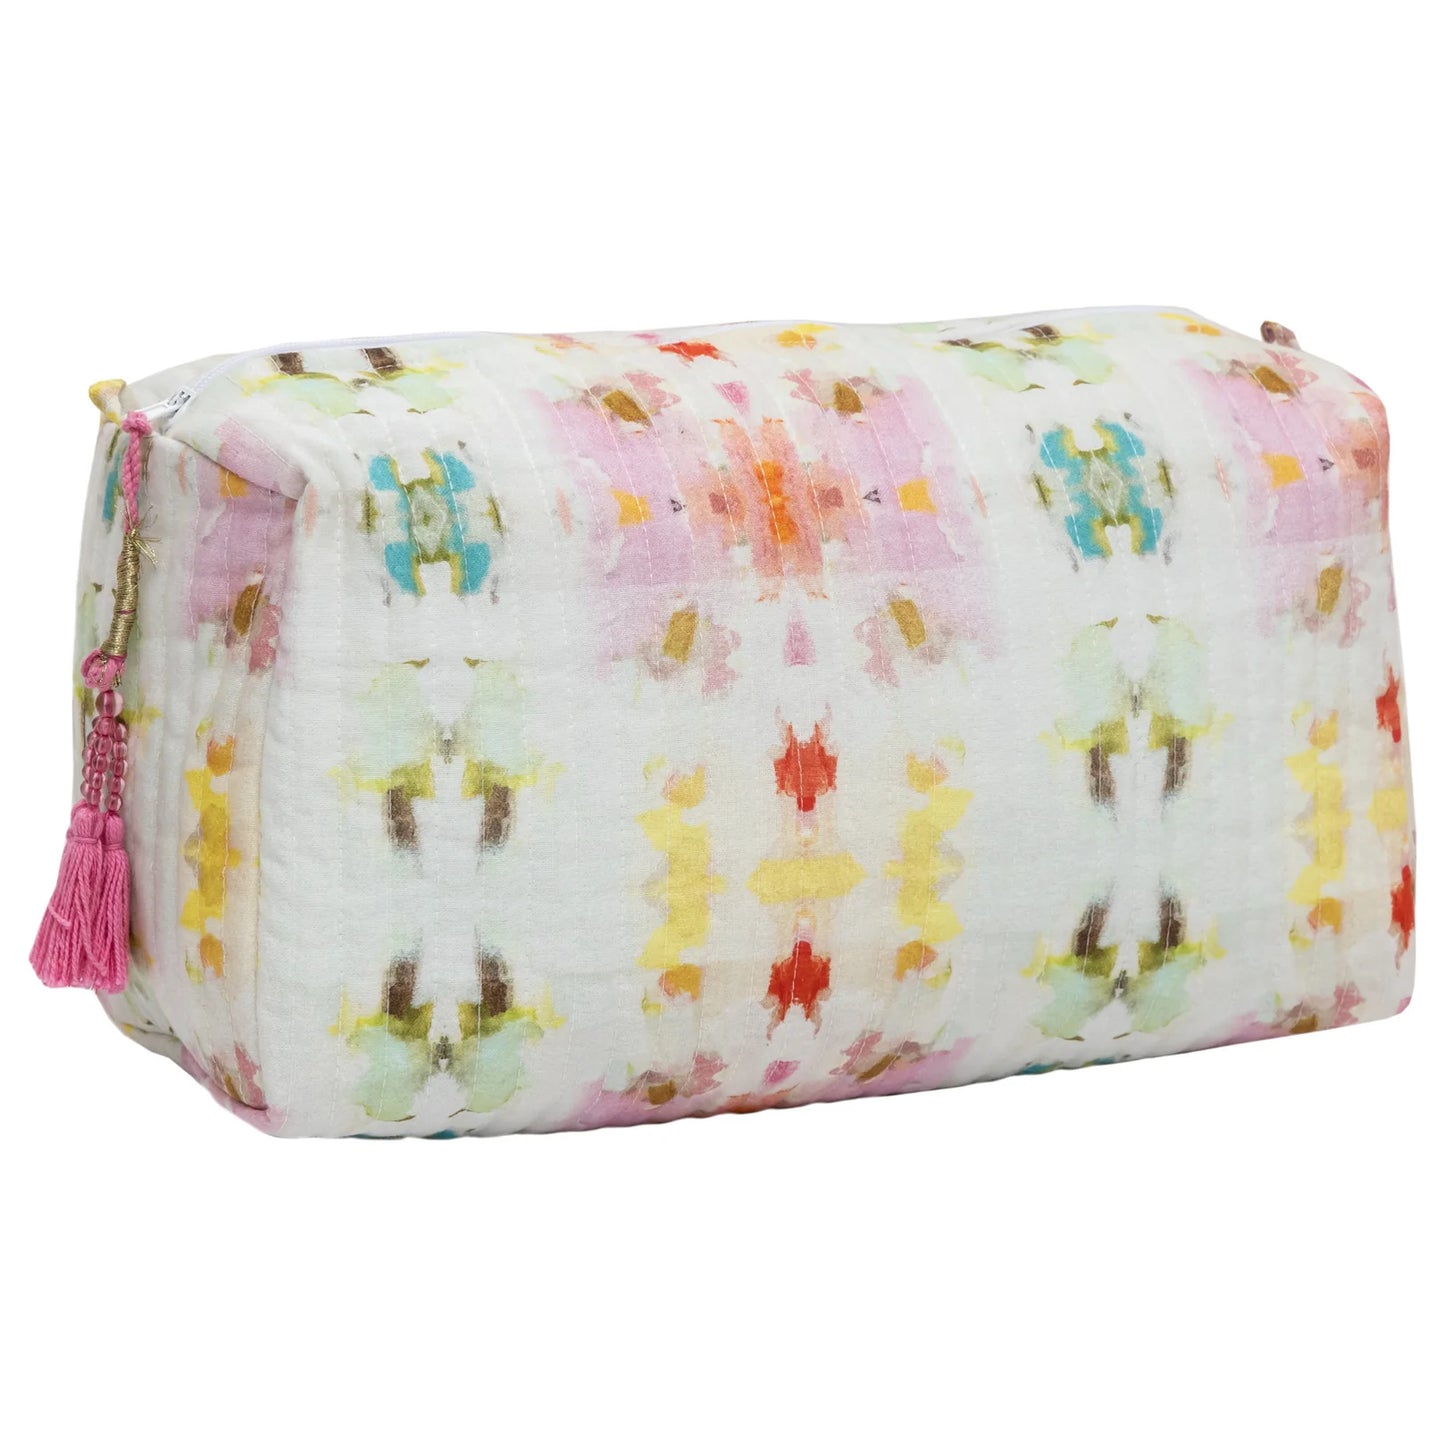 Giverny large cosmetic bag by Laura Park